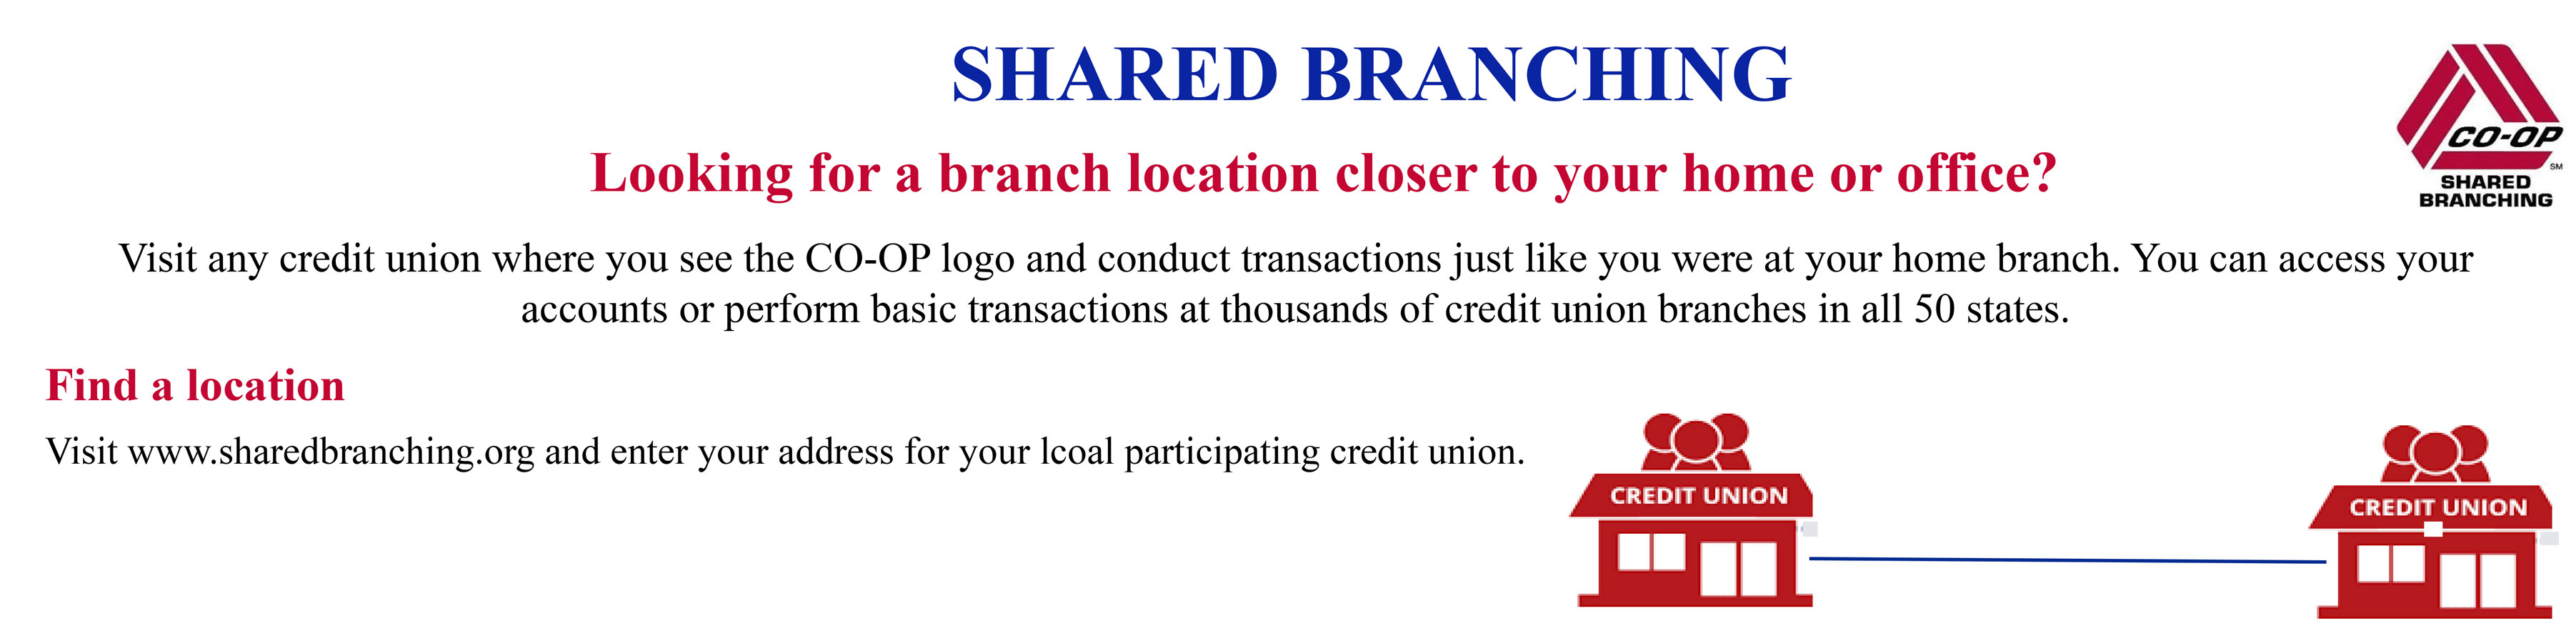 Visit Co-Op shared branching locations for convenient transactions